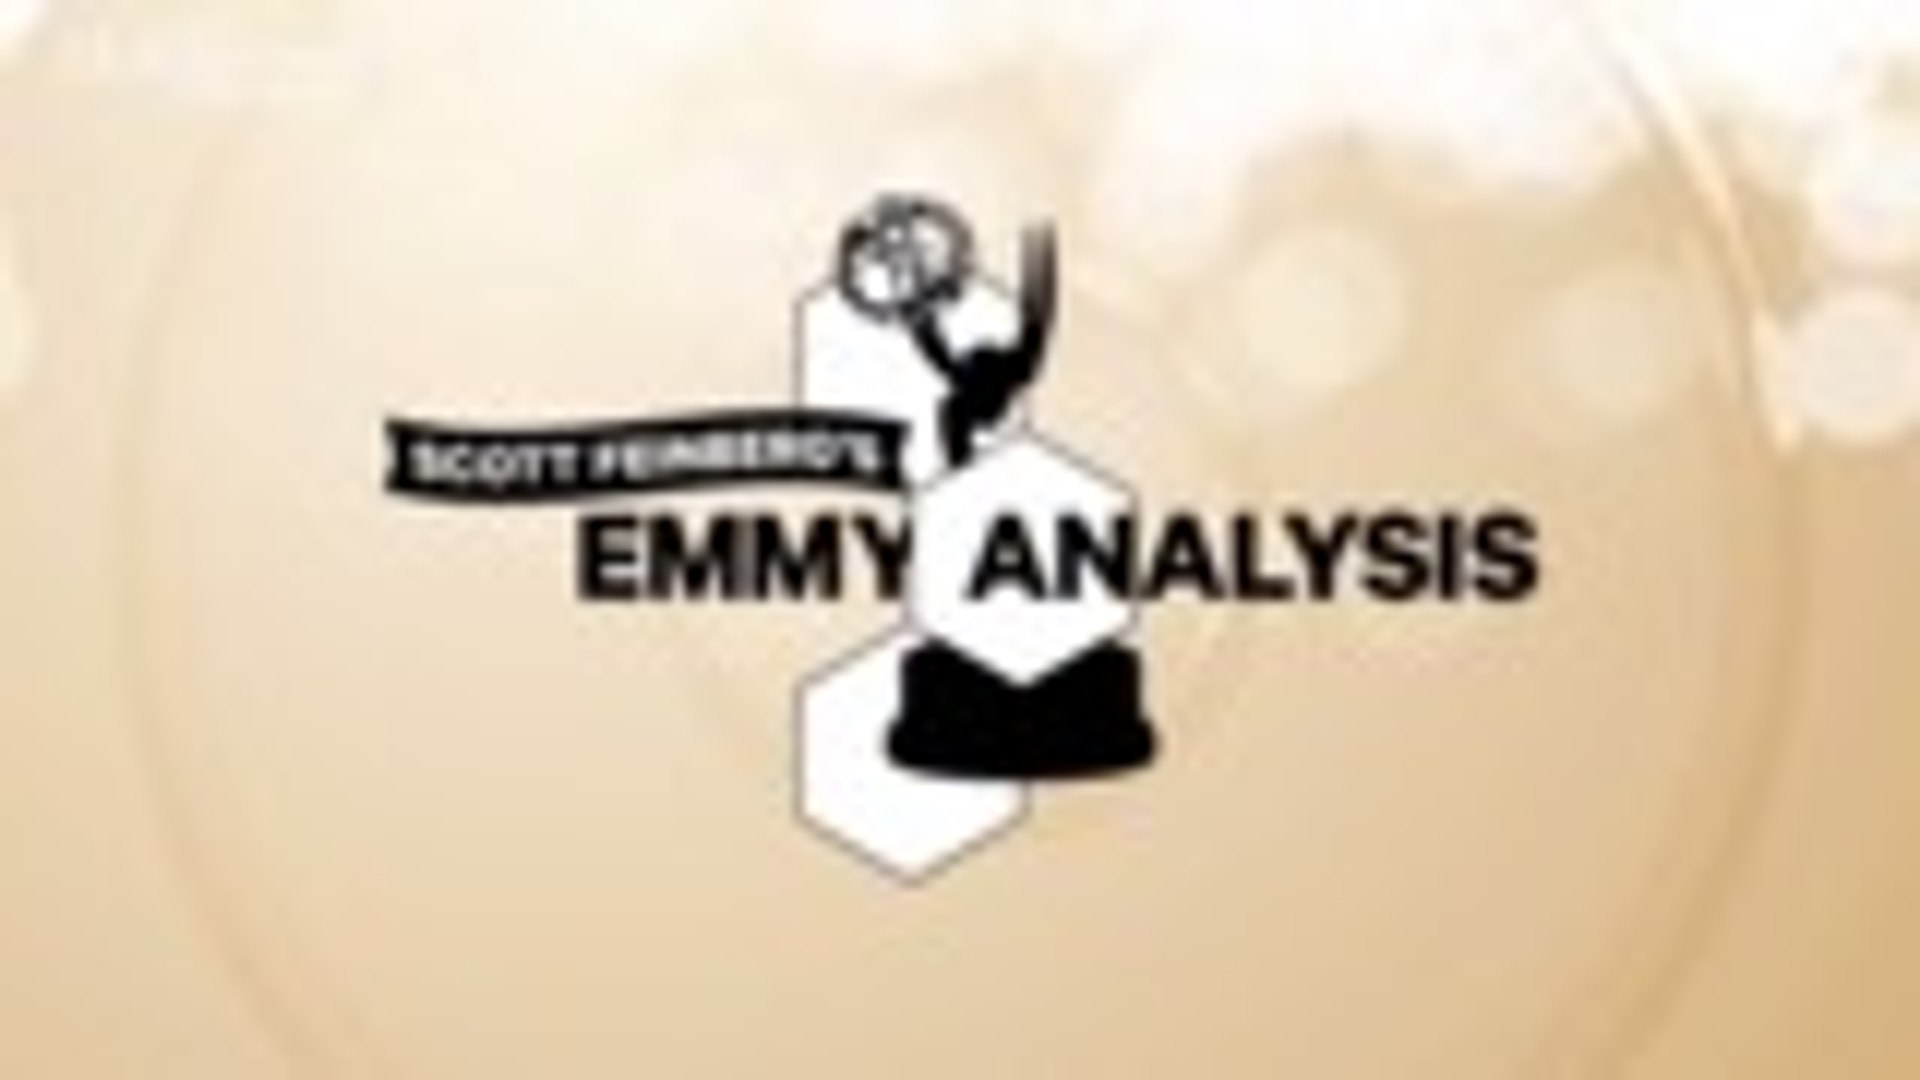 ⁣Scott Feinberg's Emmy Analysis: Which New Streaming Services Have a Chance at Emmy Nominations?